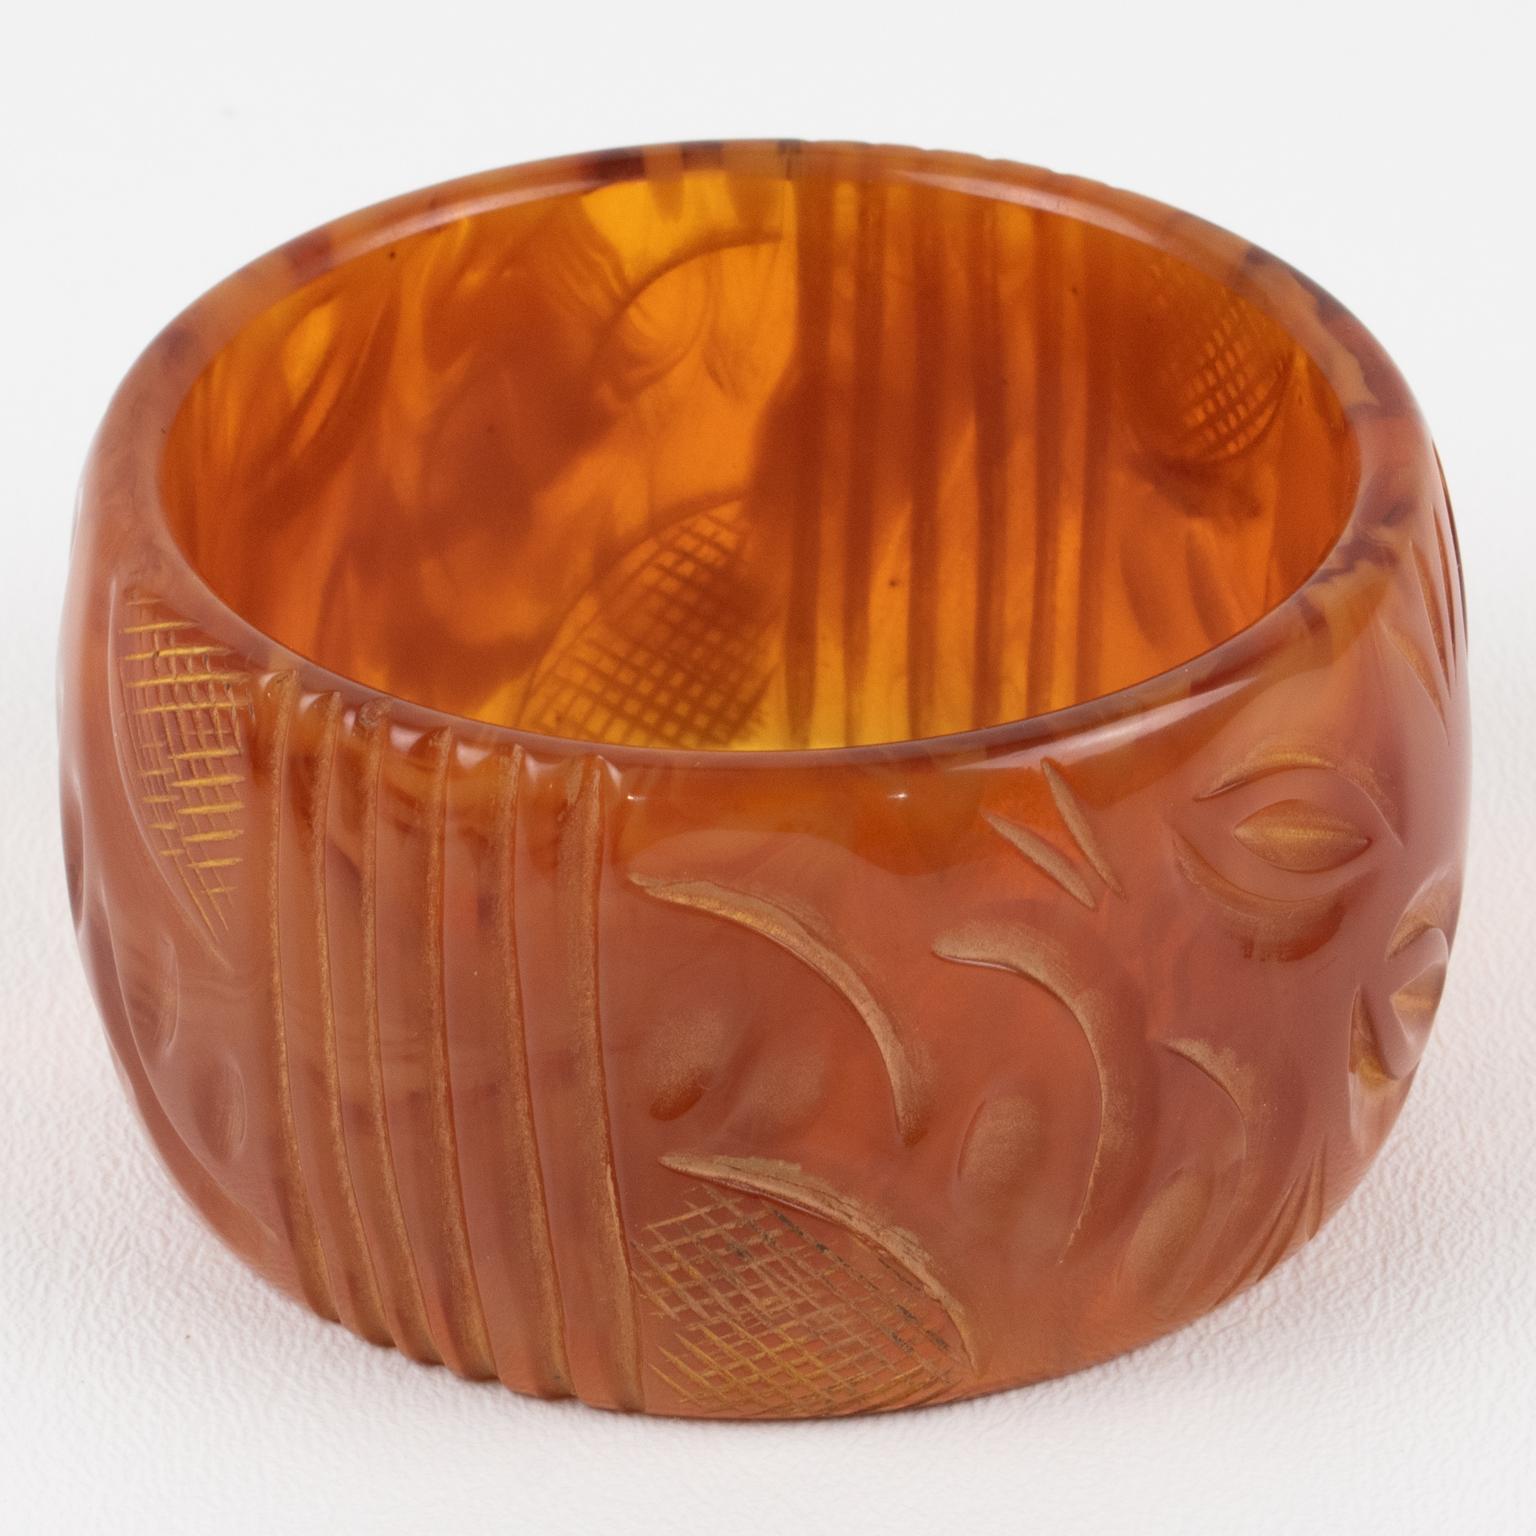 This is a lovely milky amber marble Bakelite carved bracelet bangle. It features a chunky oversized domed shape with a geometric carving design. The color is an intense amber tone with milky swirling and translucency. 
Measurements: Inside across is